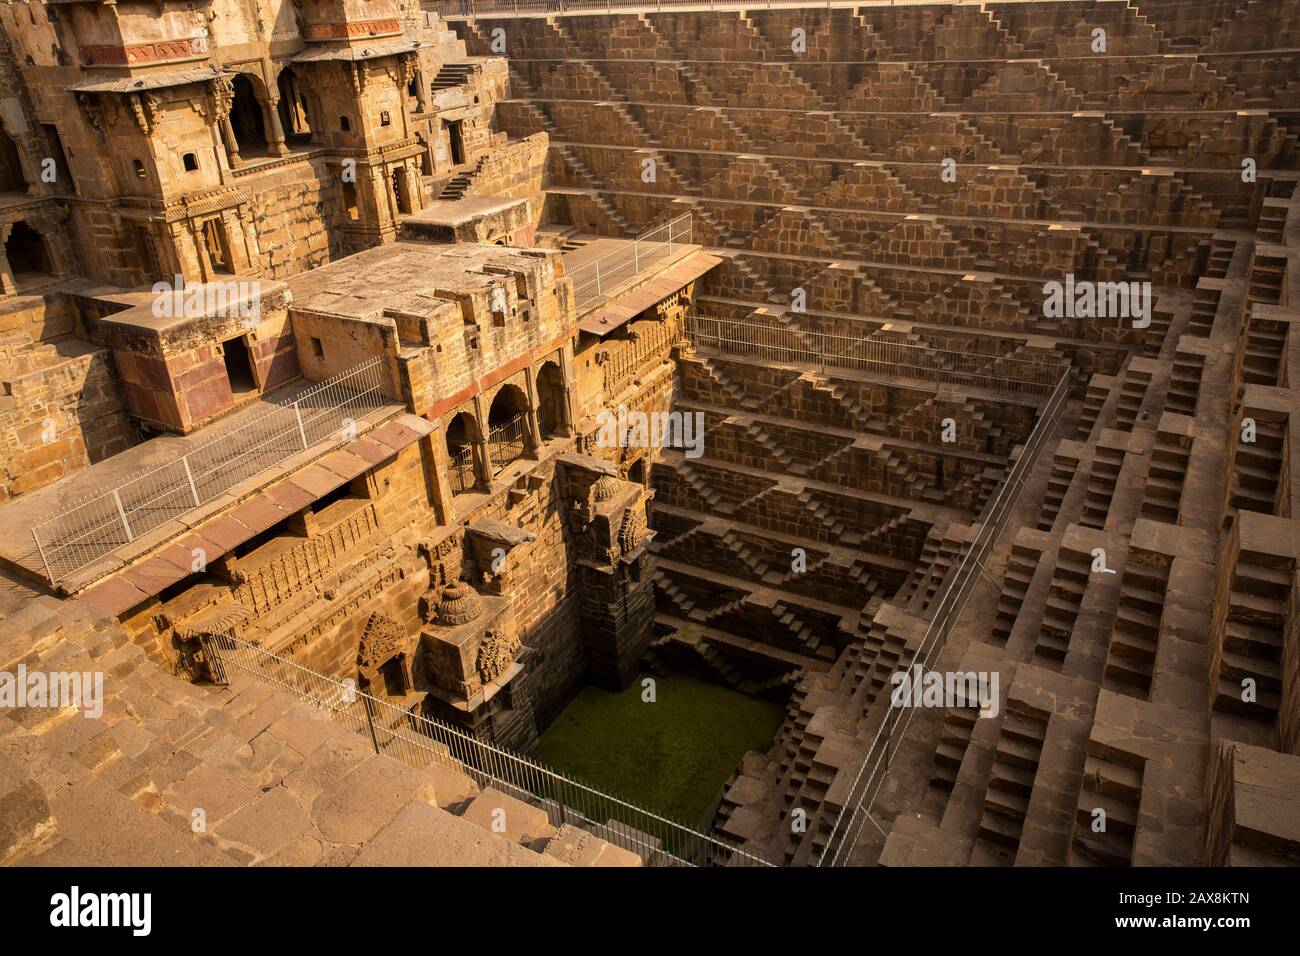 India, Rajasthan, Abhaneri, Chand Baori Stepwell, named after a local ruler called Raja Chanda, Upper Palace building and tiered steps down to water Stock Photo